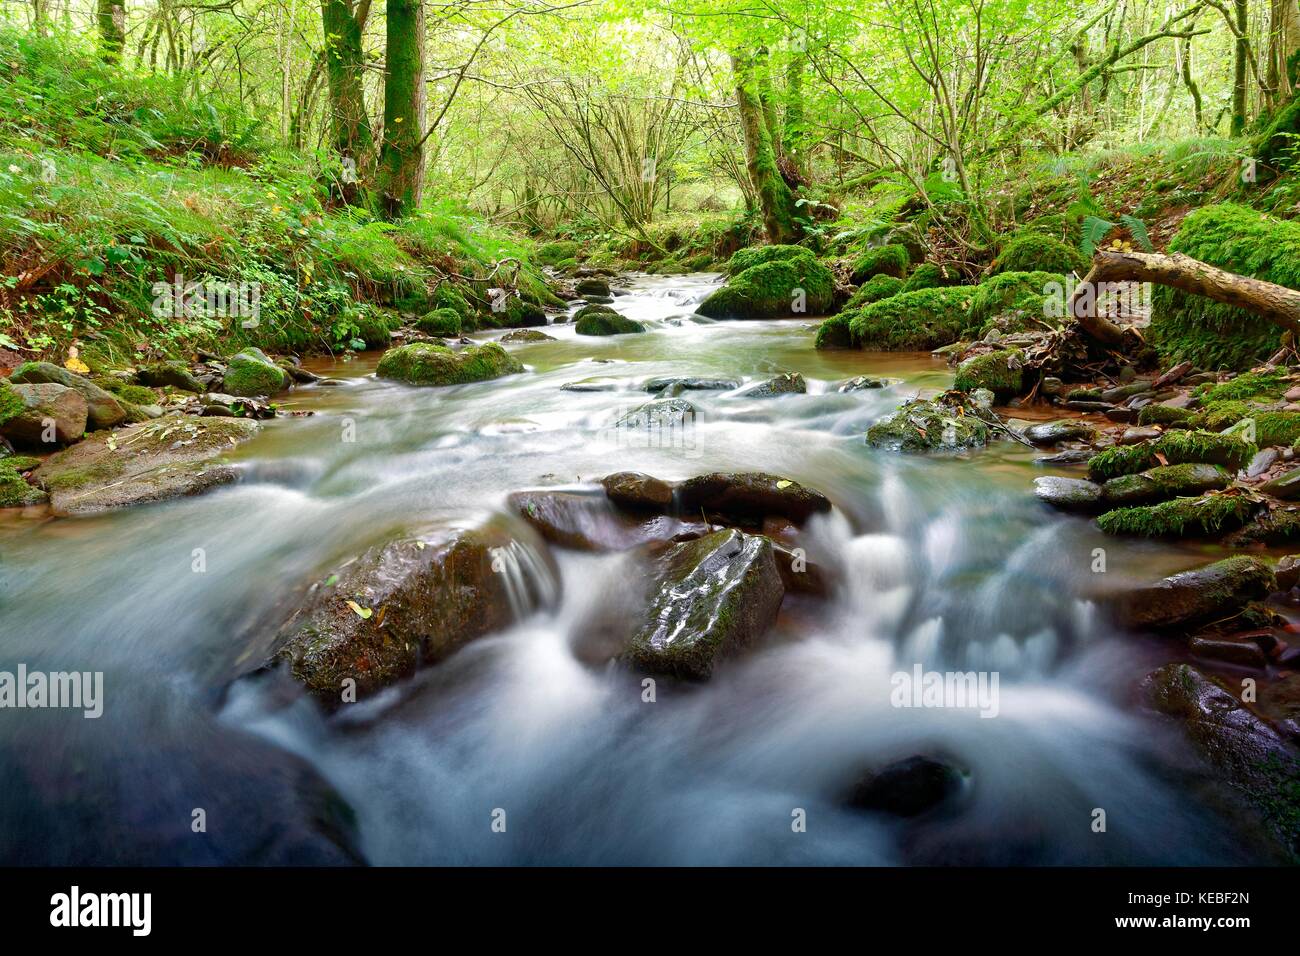 A view of the River Ennig as it flows through Pwll-y-Wrach Nature Reserve in the Brecon Beacons, Wales, UK Stock Photo